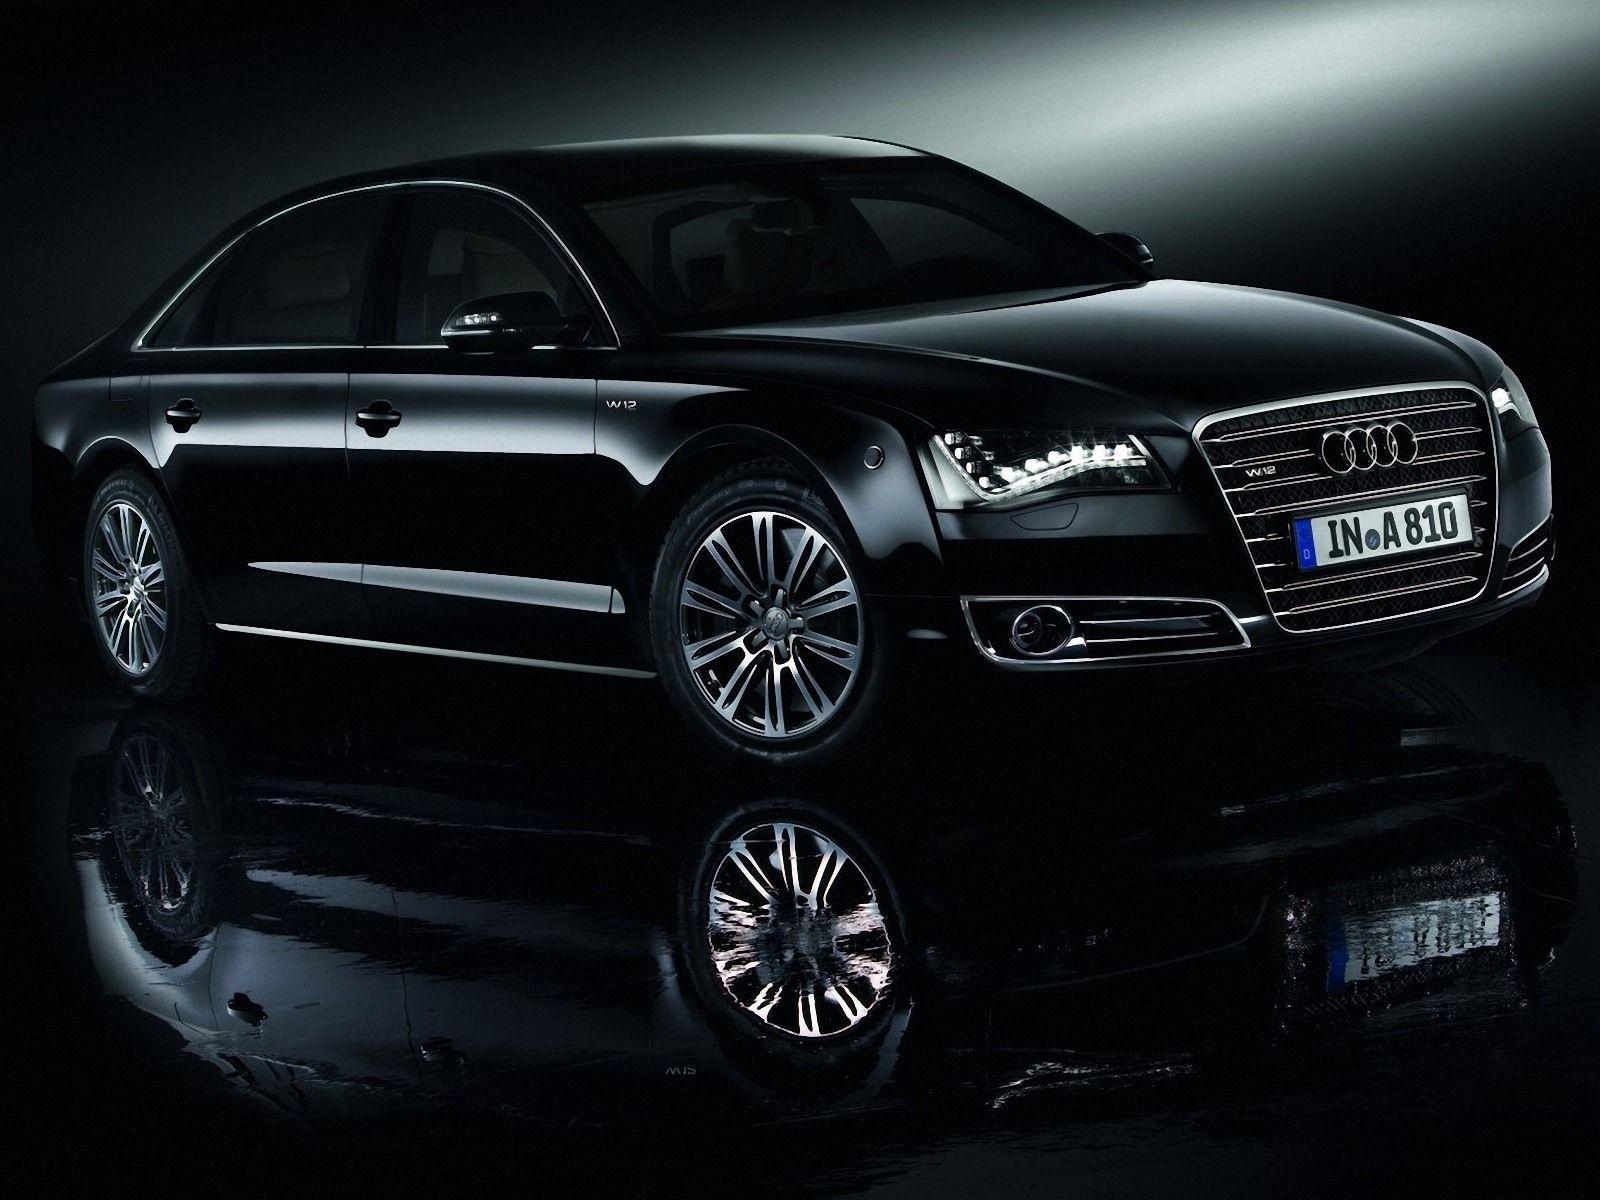 Audi A8 Wallpaper, Audi A8 Background for PC% Quality HD